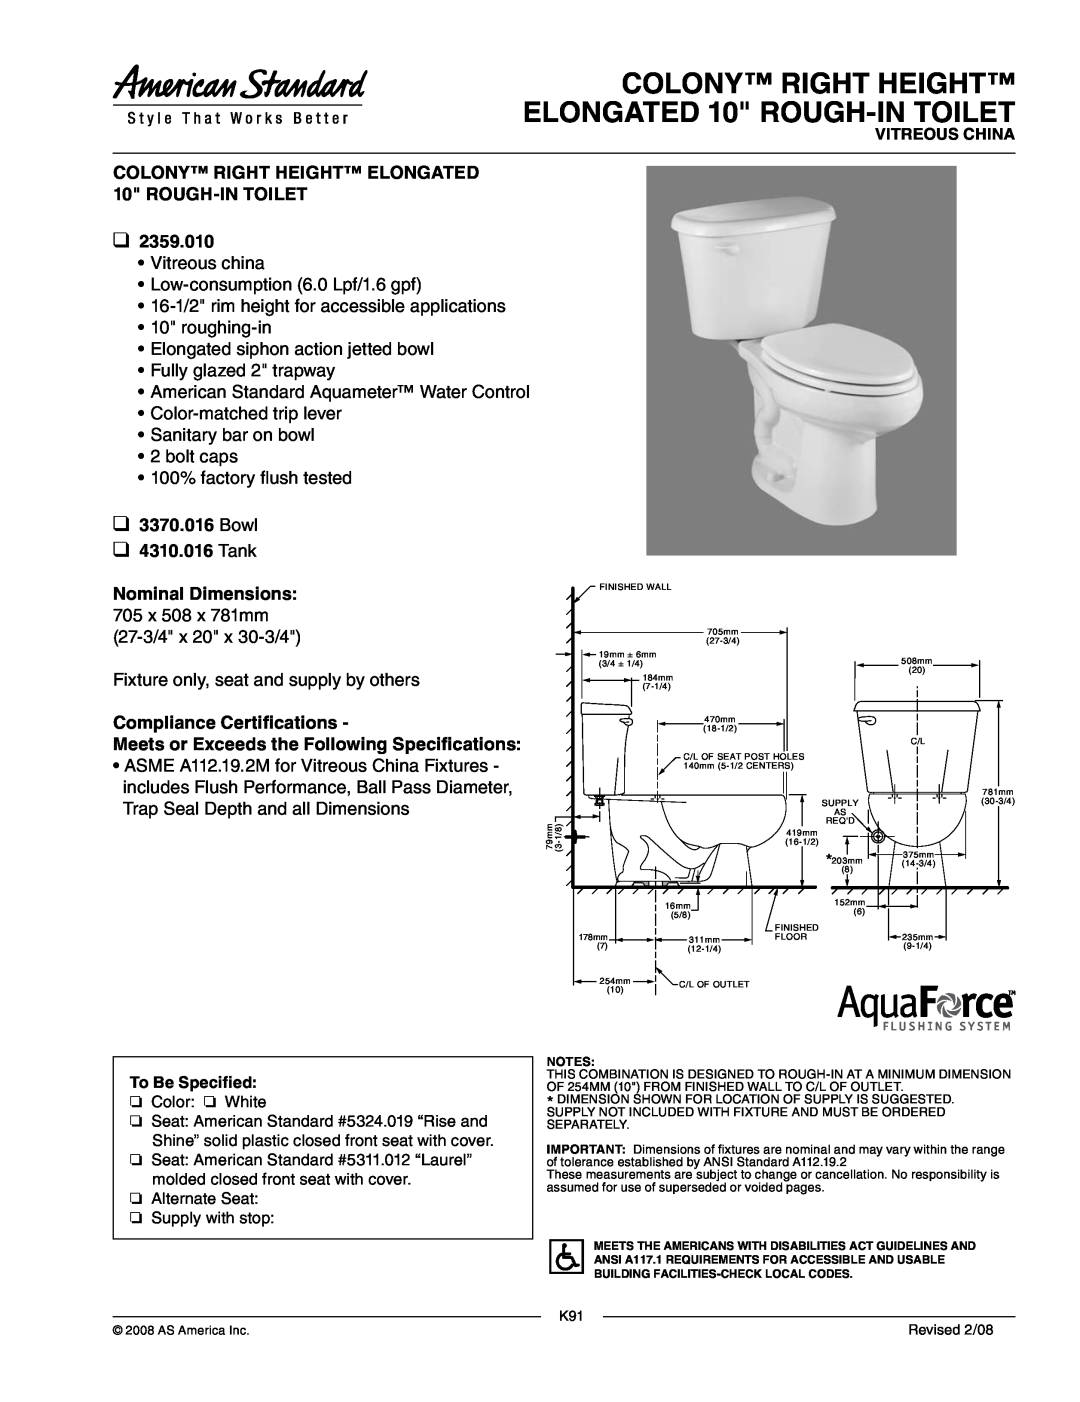 American Standard 3370.016 dimensions COLONY RIGHT HEIGHT ELONGATED 10 ROUGH-INTOILET, 2359.010, Bowl 4310.016 Tank 